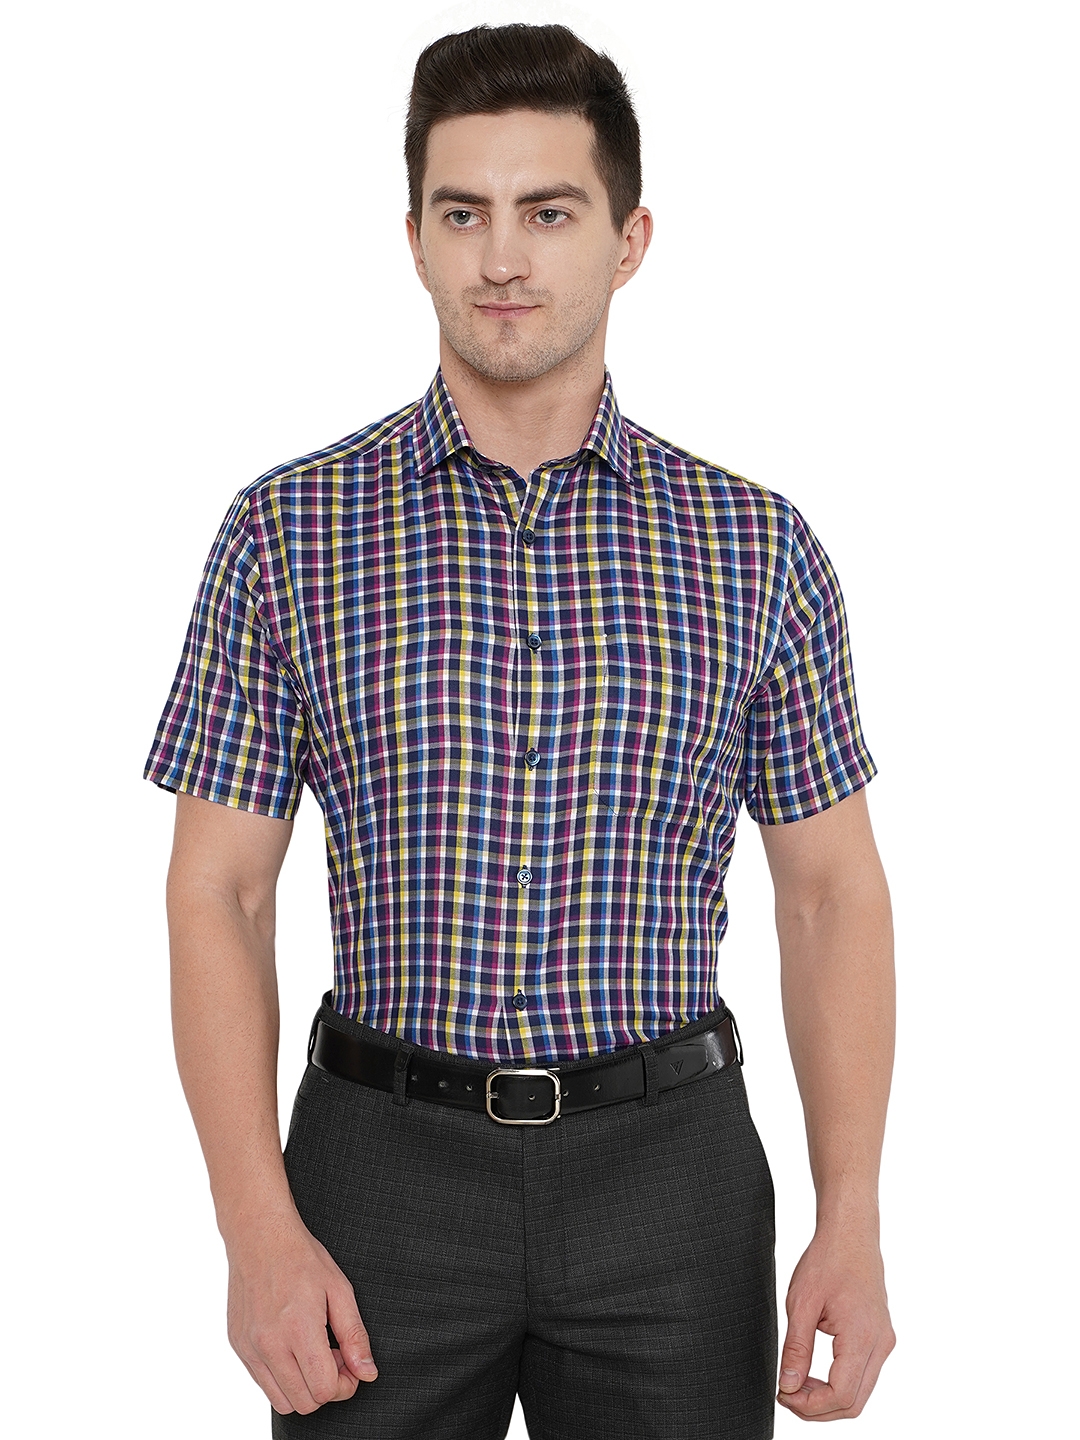 Greenfibre | White & Blue Checked Regular Fit Formal Shirt | Greenfibre 0